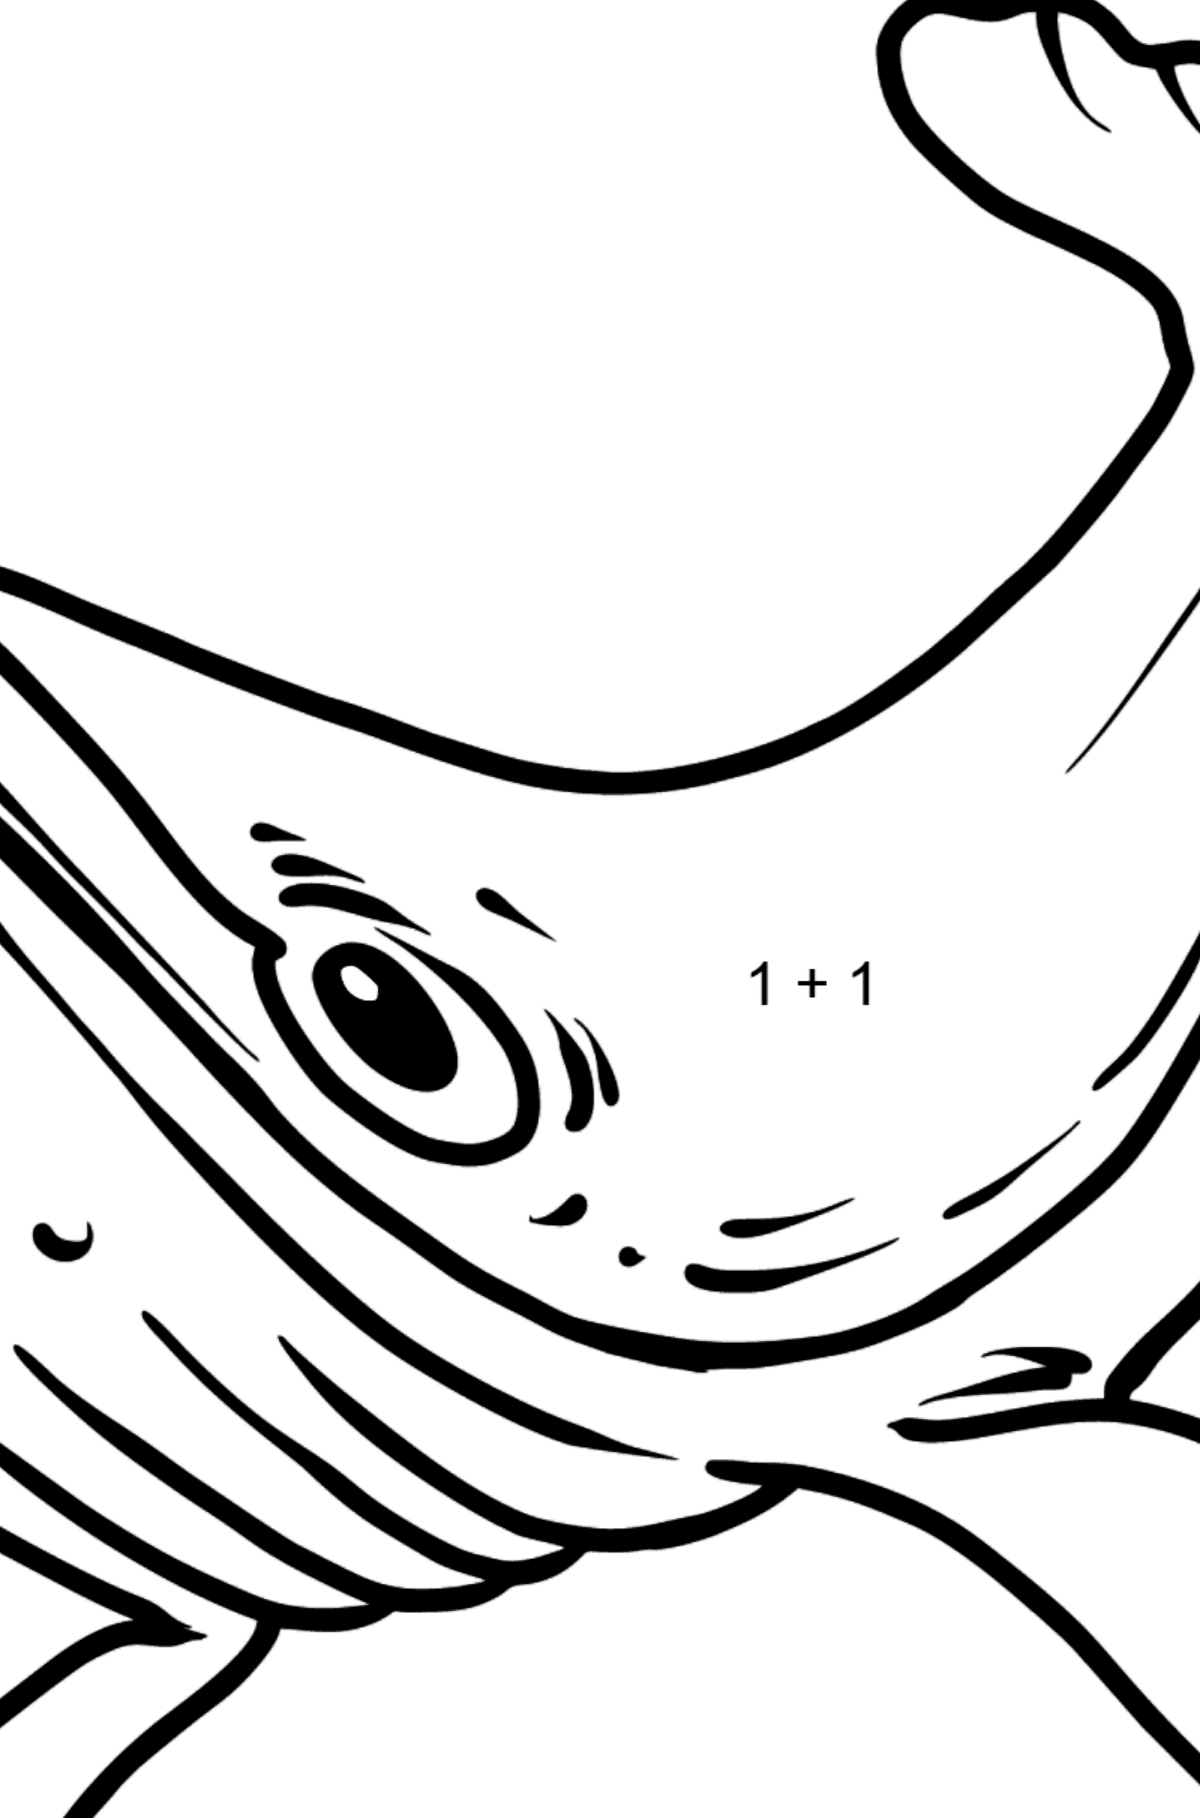 Whale coloring page - Math Coloring - Addition for Kids